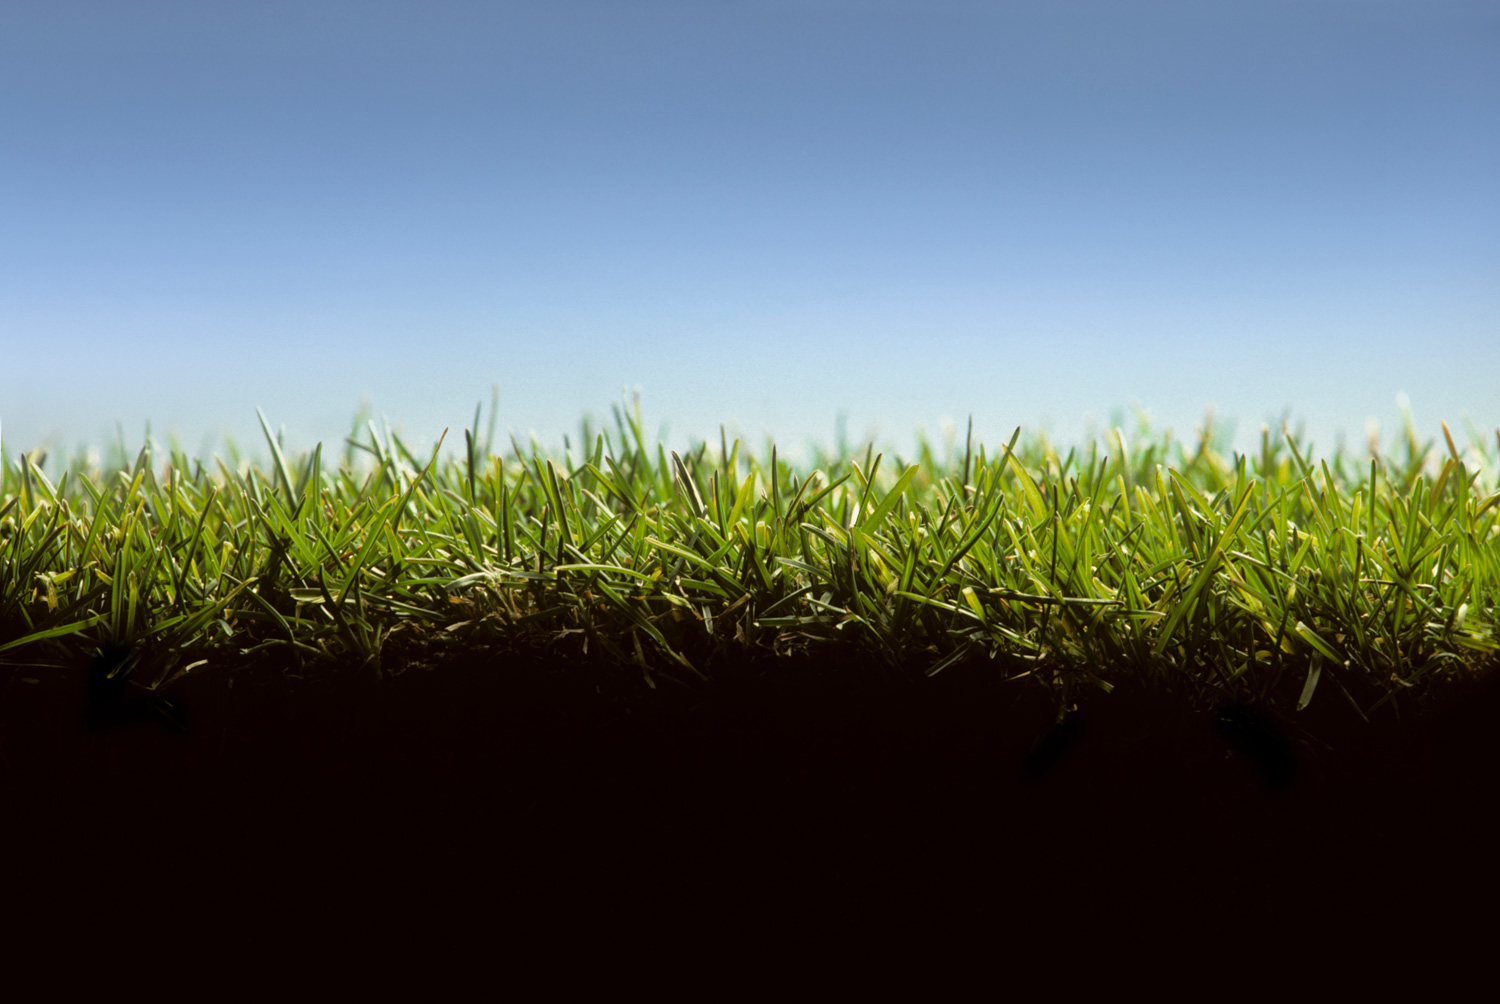 Cross section of lawn showing grass at ground level